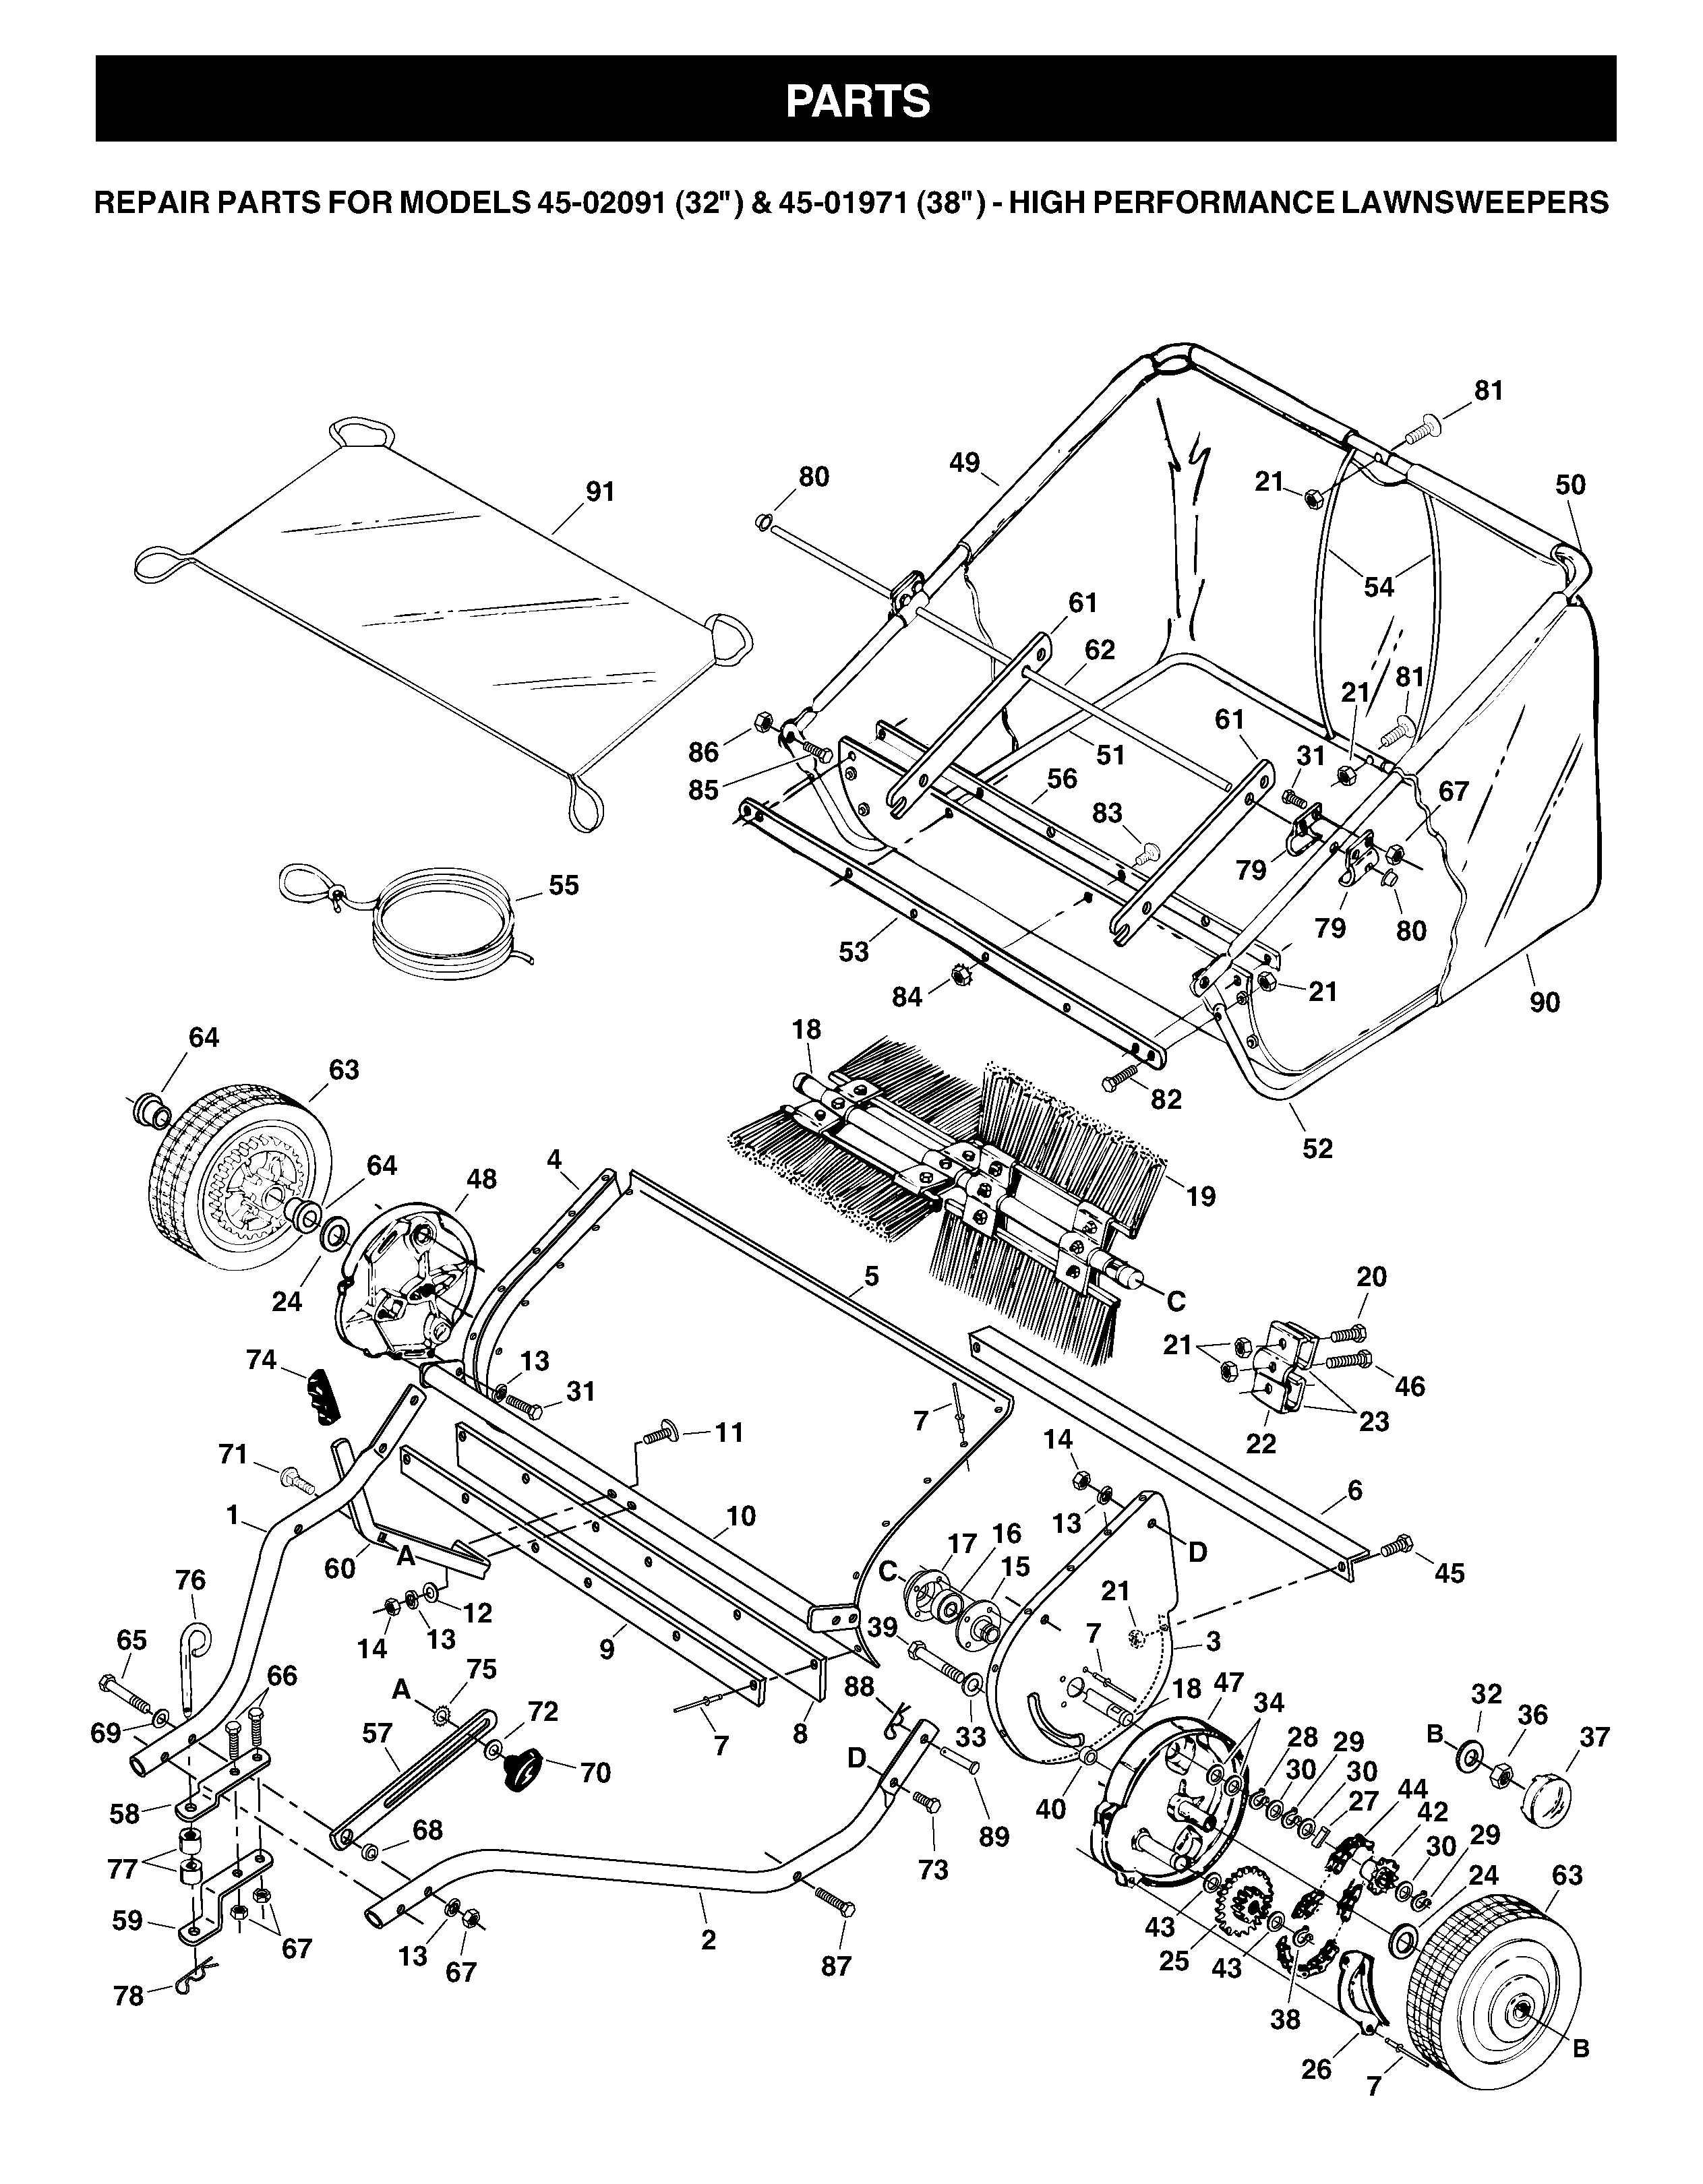 Chassis and appendix 531007409, 531007411, 531002808, 531002809, 531007413, 531007415, 531007416, 722787003, 531007617, 531007609, 531007418, 531002815, 531002816, 735116405, 873220500, 506620201, 531002817, 506620401, 531007615, 531007420, 725237071, 531007629, 506620601, 506620701, 531002741, 506621701, 506621801, 506621901, 506622301, 506622401, 577731701, 596030501, 734117341, 734117201, 506624701, 506622901, 506623001, 506623101, 874610652, 506626601, 531002799, 506623501, 506623601, 531002745, 531002821, 531007626, 531002744, 531002743, 531007603, 531007602, 531007604, 531007605, 531007614, 506624401, 531002734, 531007609, 531002828, 531002772, 506621201, 531002831, 531007423, 531007424, 531002746, 506625401, 531002834, 531002835, 531007616, 531002836, 734115201, 506626001, 595901601, 734116401, 531007426, 506626401, 531002839, 506625601, 506626501, 721680251, 506626701, 531002840, 725237251, 725237471, 725232951, 732211401, 506625301, 596322601, 531002838, 531002843, 531007606, 531002856